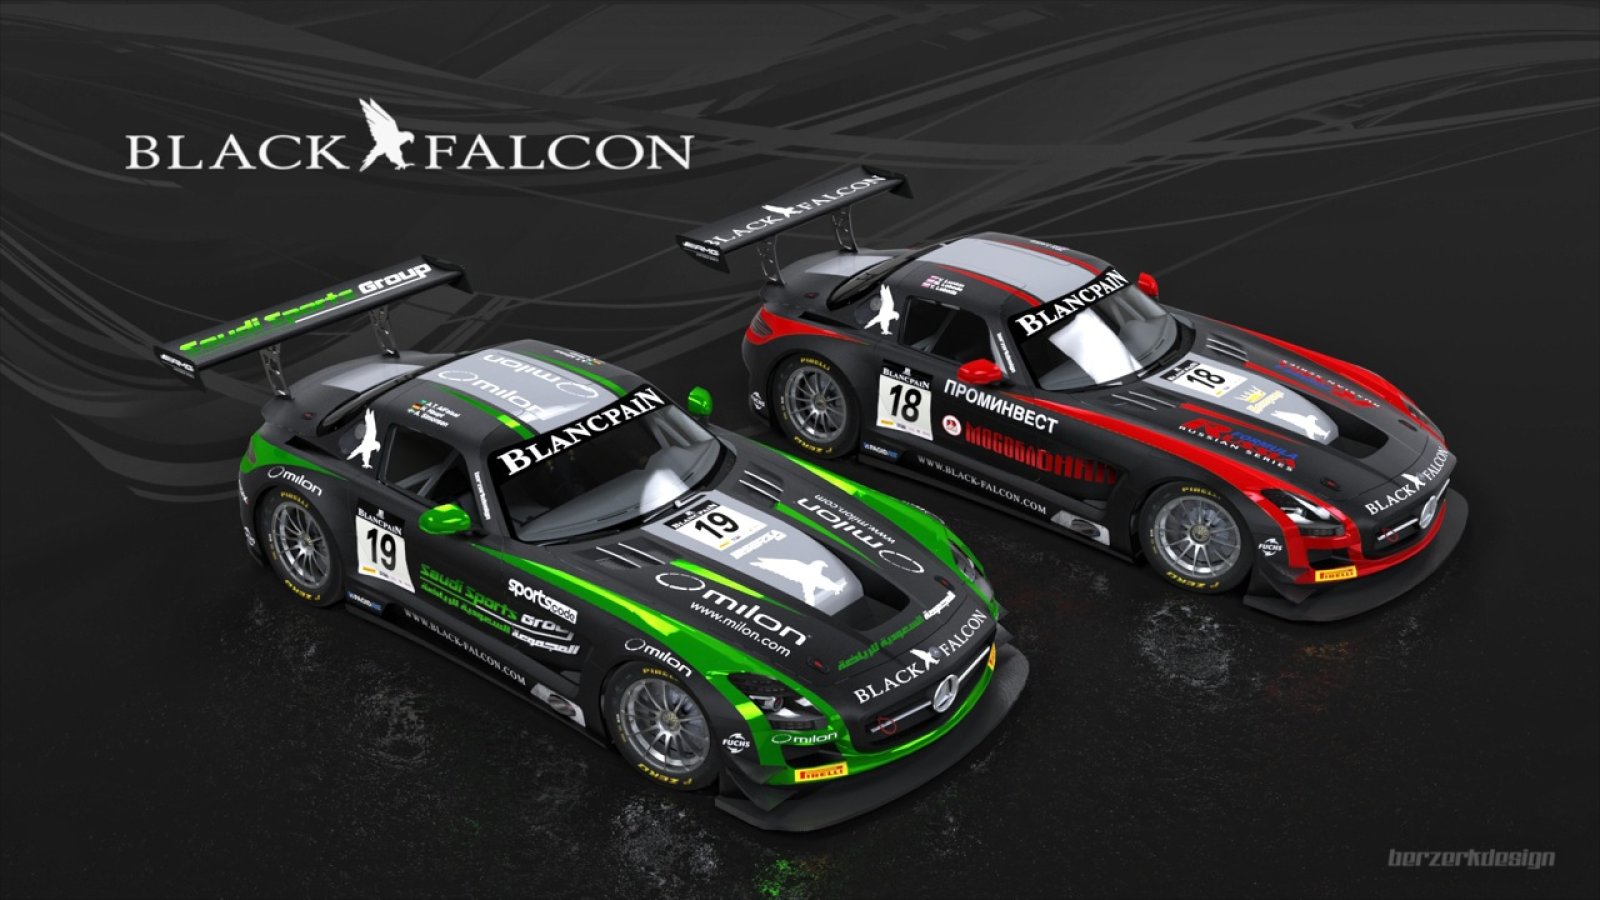 New Challenges for Team Black Falcon in 2014